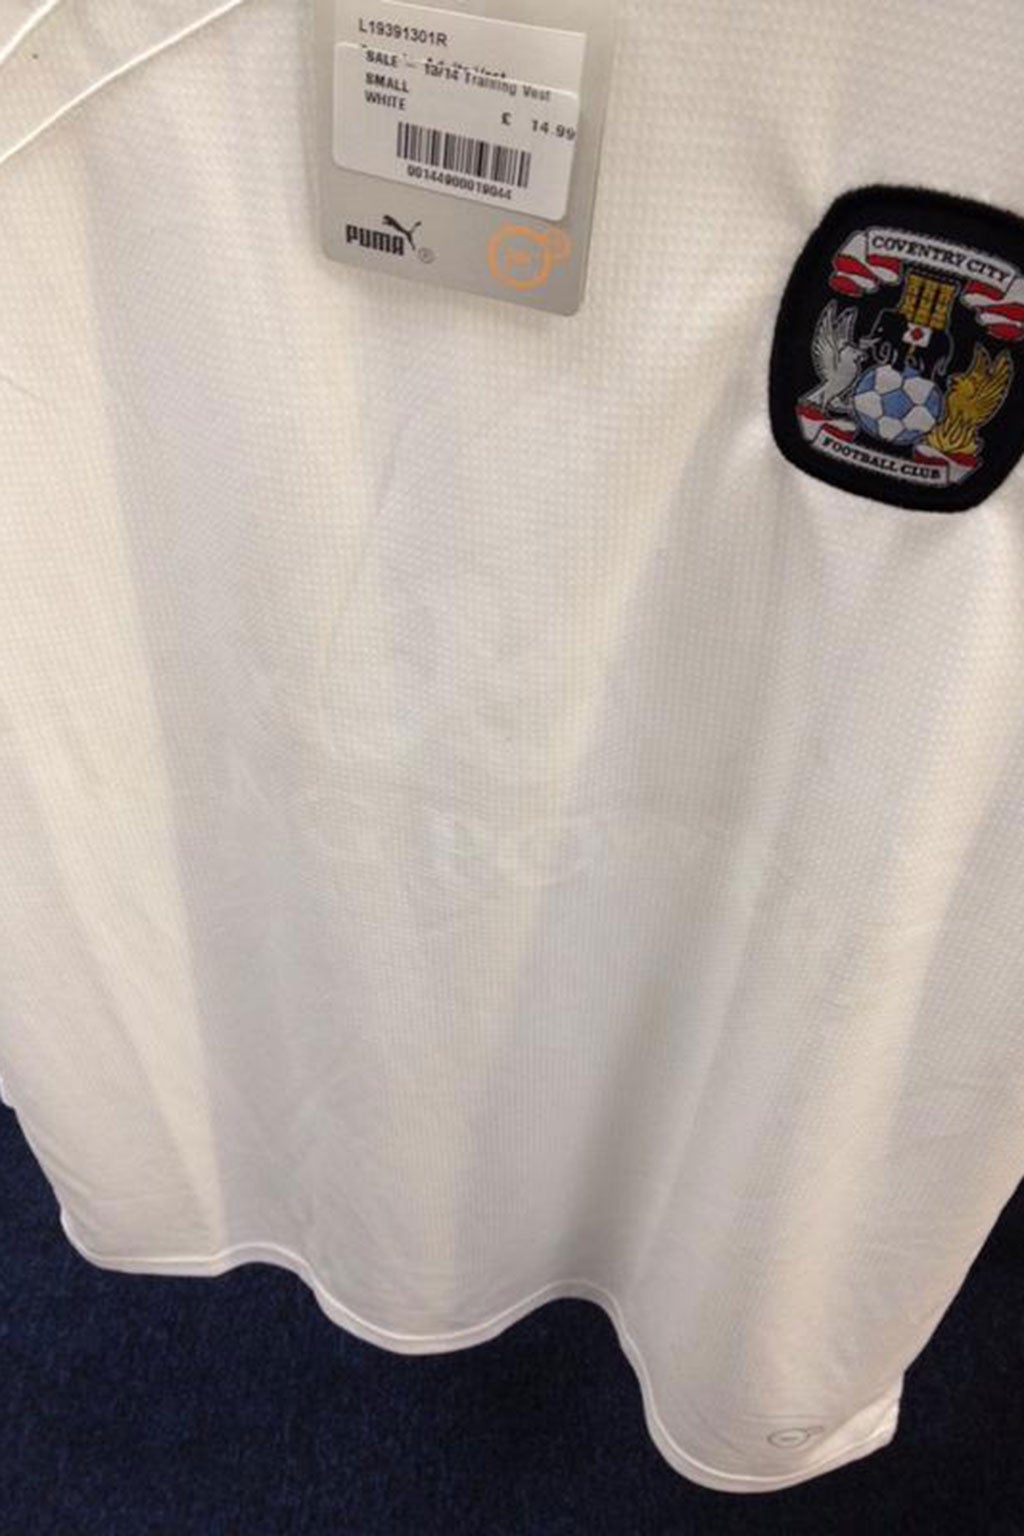 A Coventry City shirt with 'King Power' visible on the material